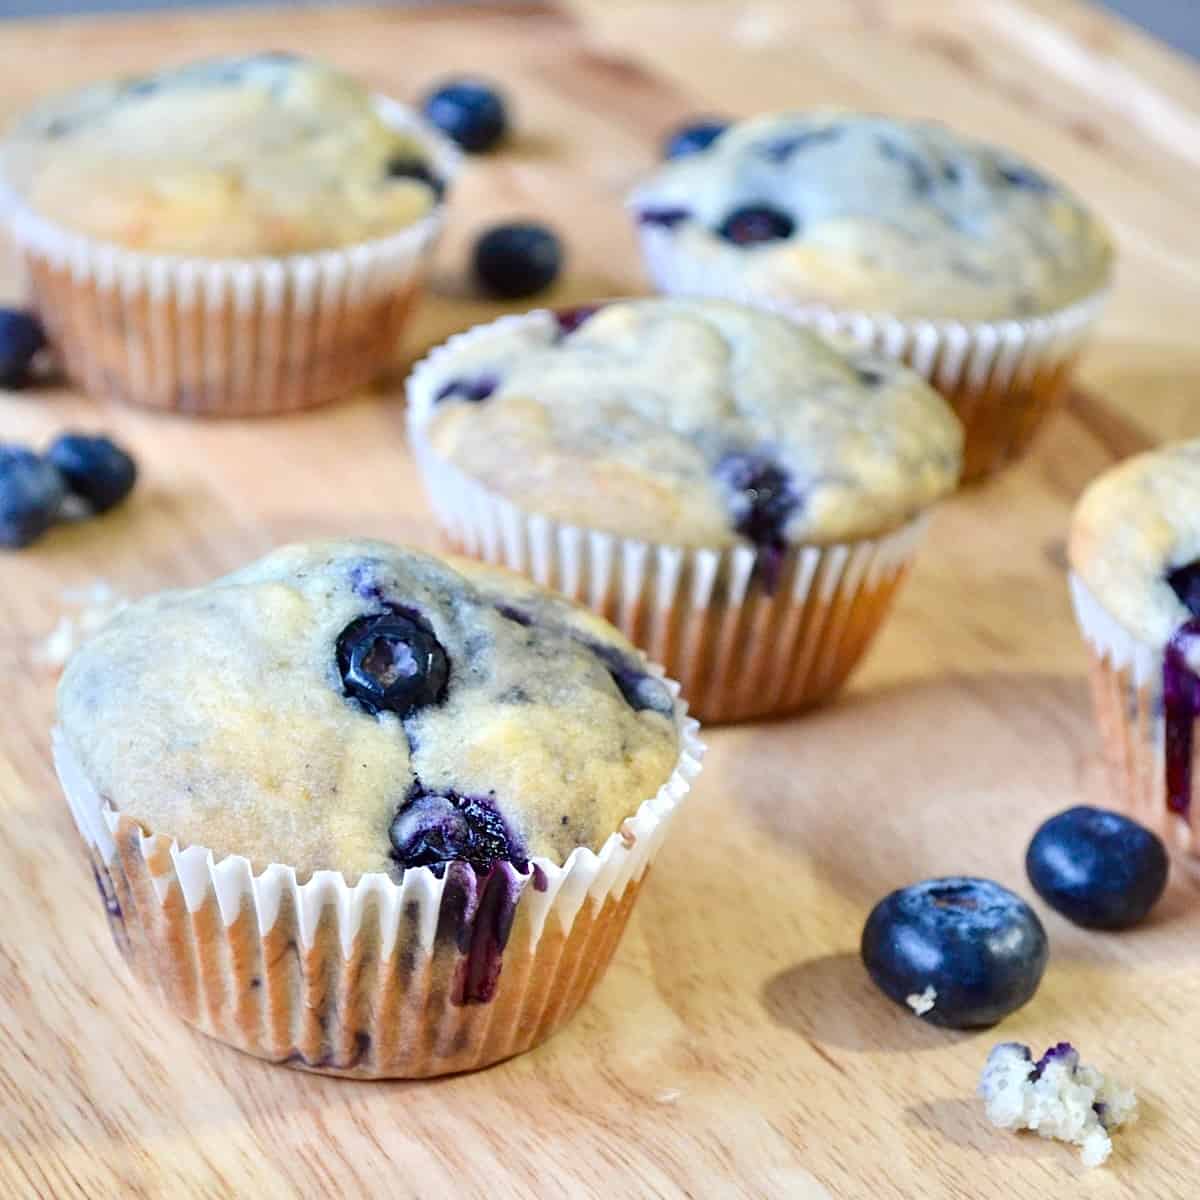 Blueberry muffins with fresh berries and crumbs